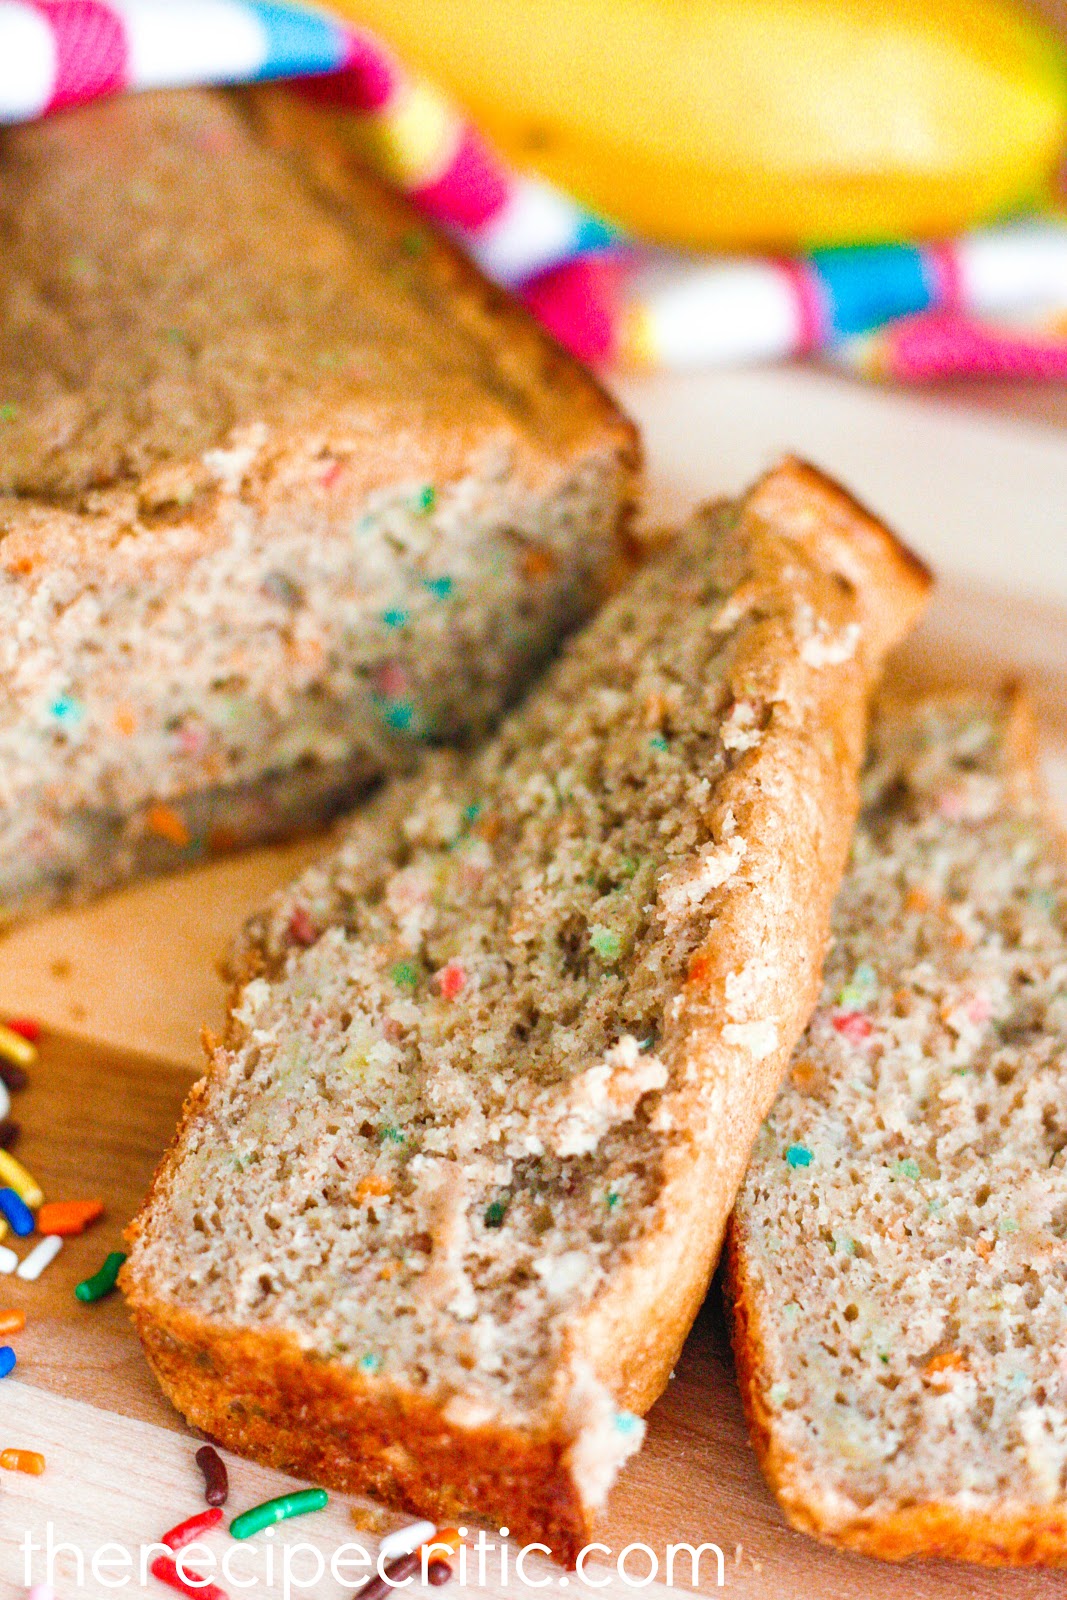 This Funfetti banana bread is so easy to throw together and it made with a cake mix and there aren't too many ingredients to it